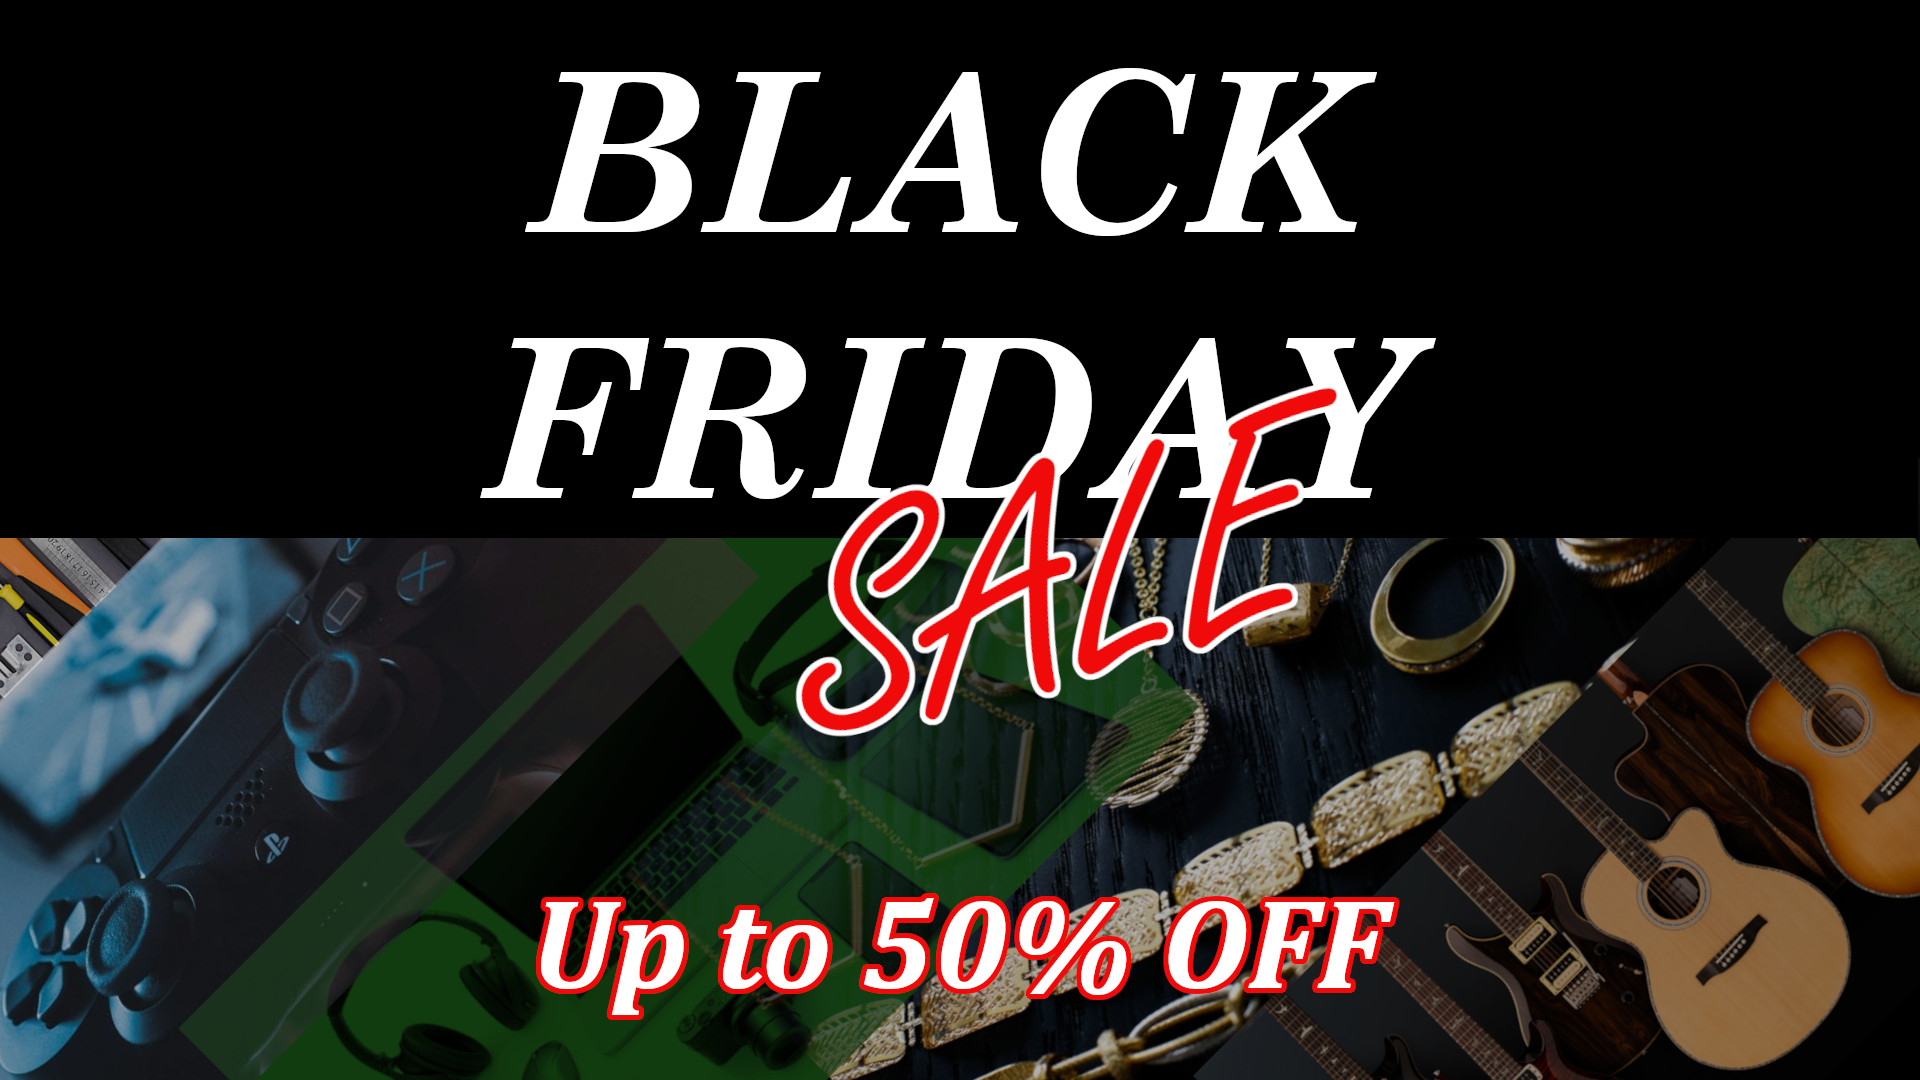 Black Friday SALE On Now!